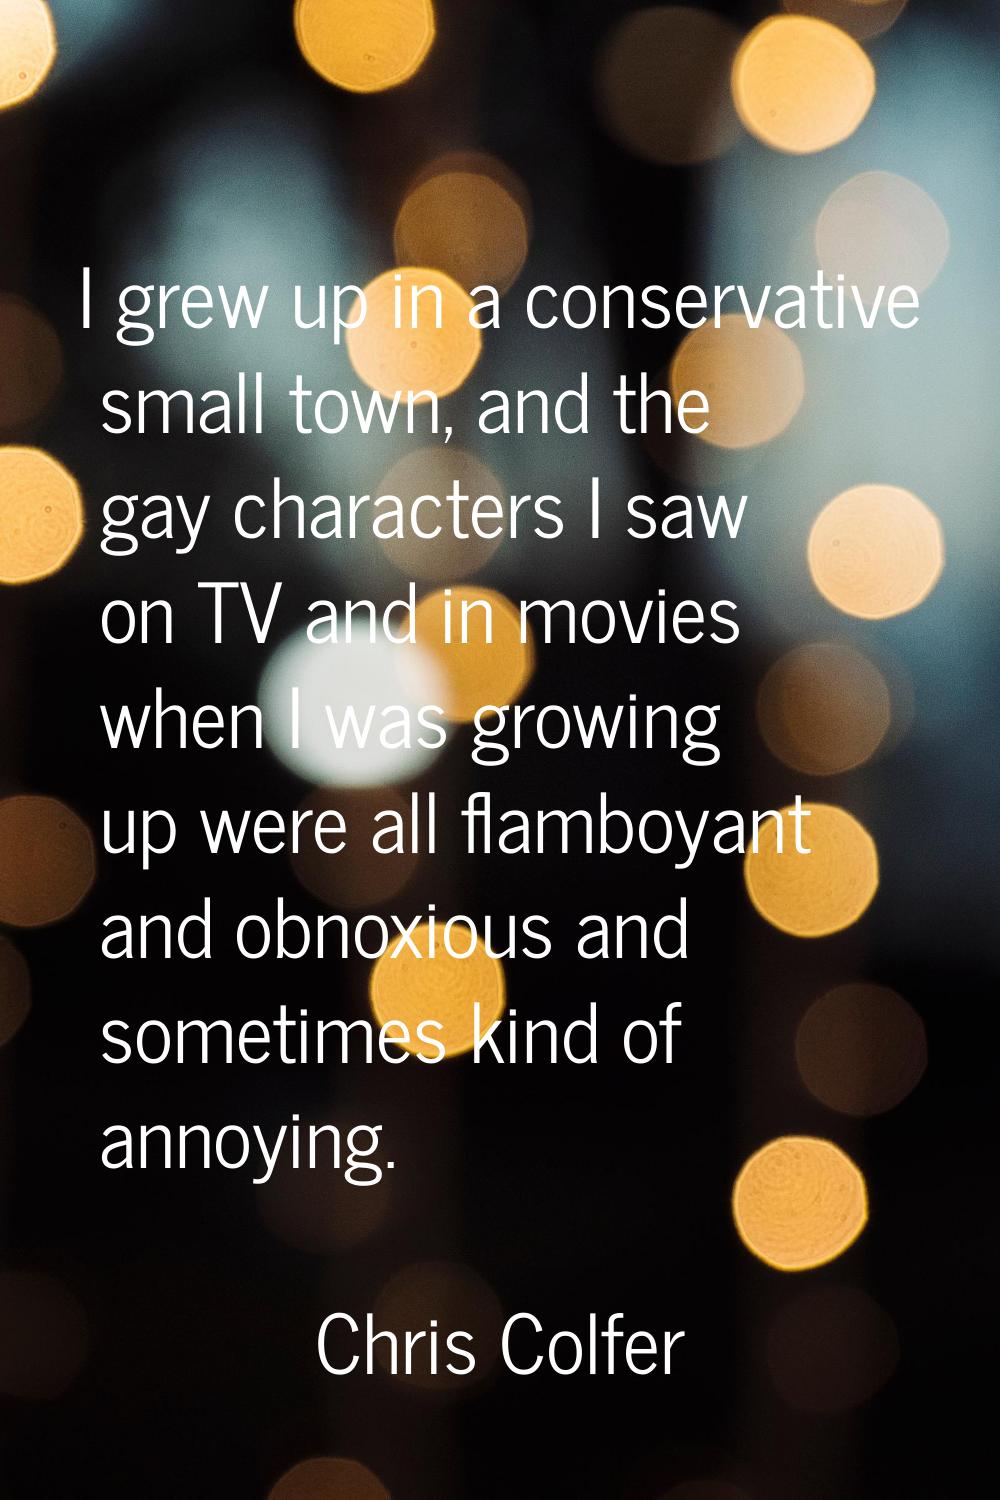 I grew up in a conservative small town, and the gay characters I saw on TV and in movies when I was